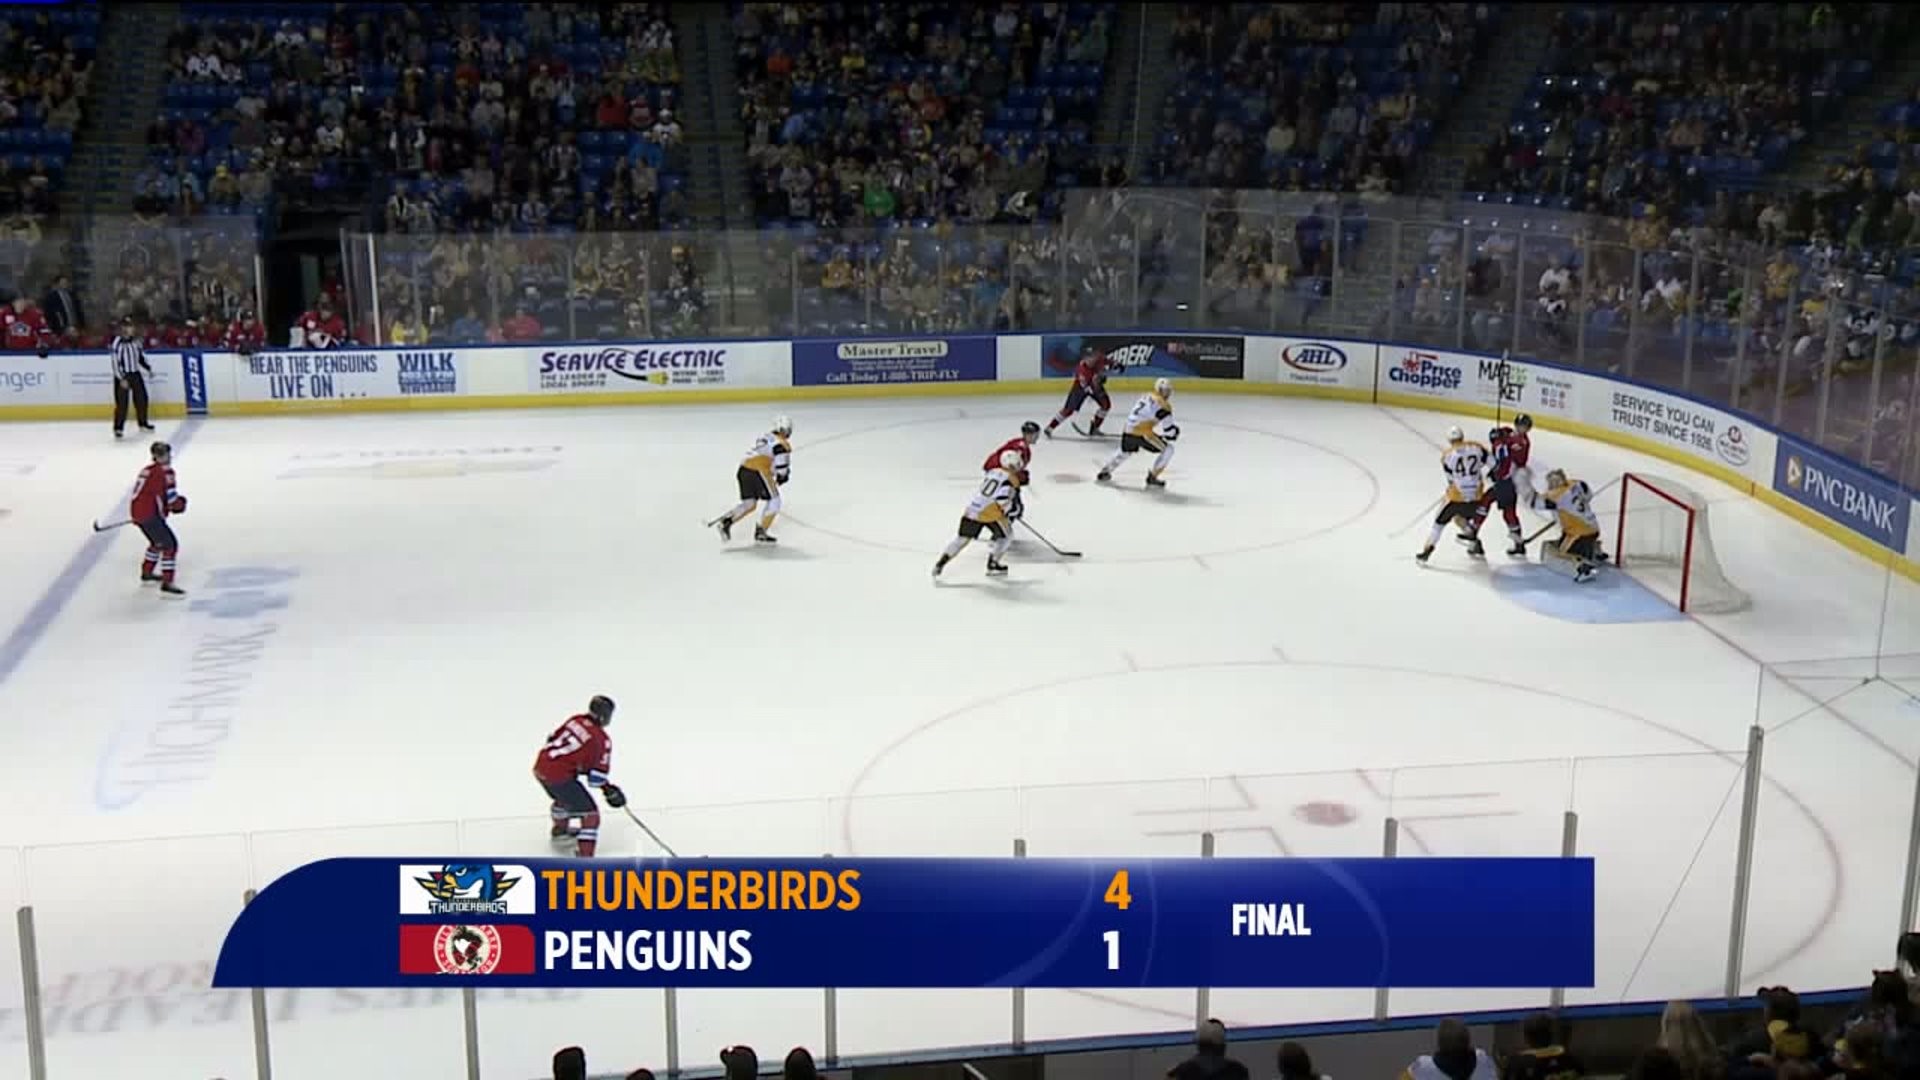 Penguins Playoff Push Falters in 4-1 Loss to Thunderbirds